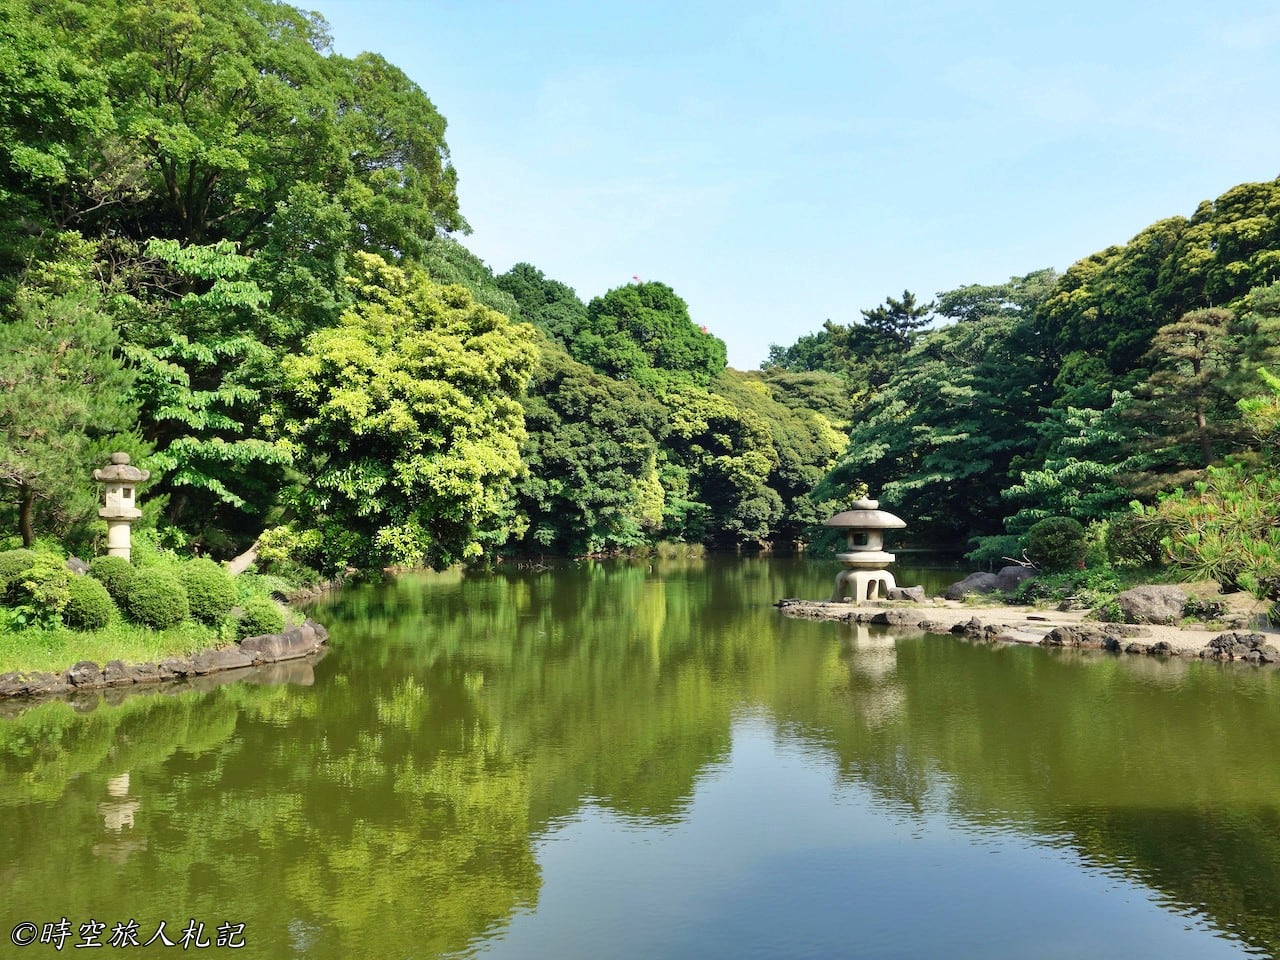 Tokyo,Tokyo 3 Days Tours,Tokyo 3 Days Tours Itinerary,Tokyo Attractions,Tokyo Downtown 20